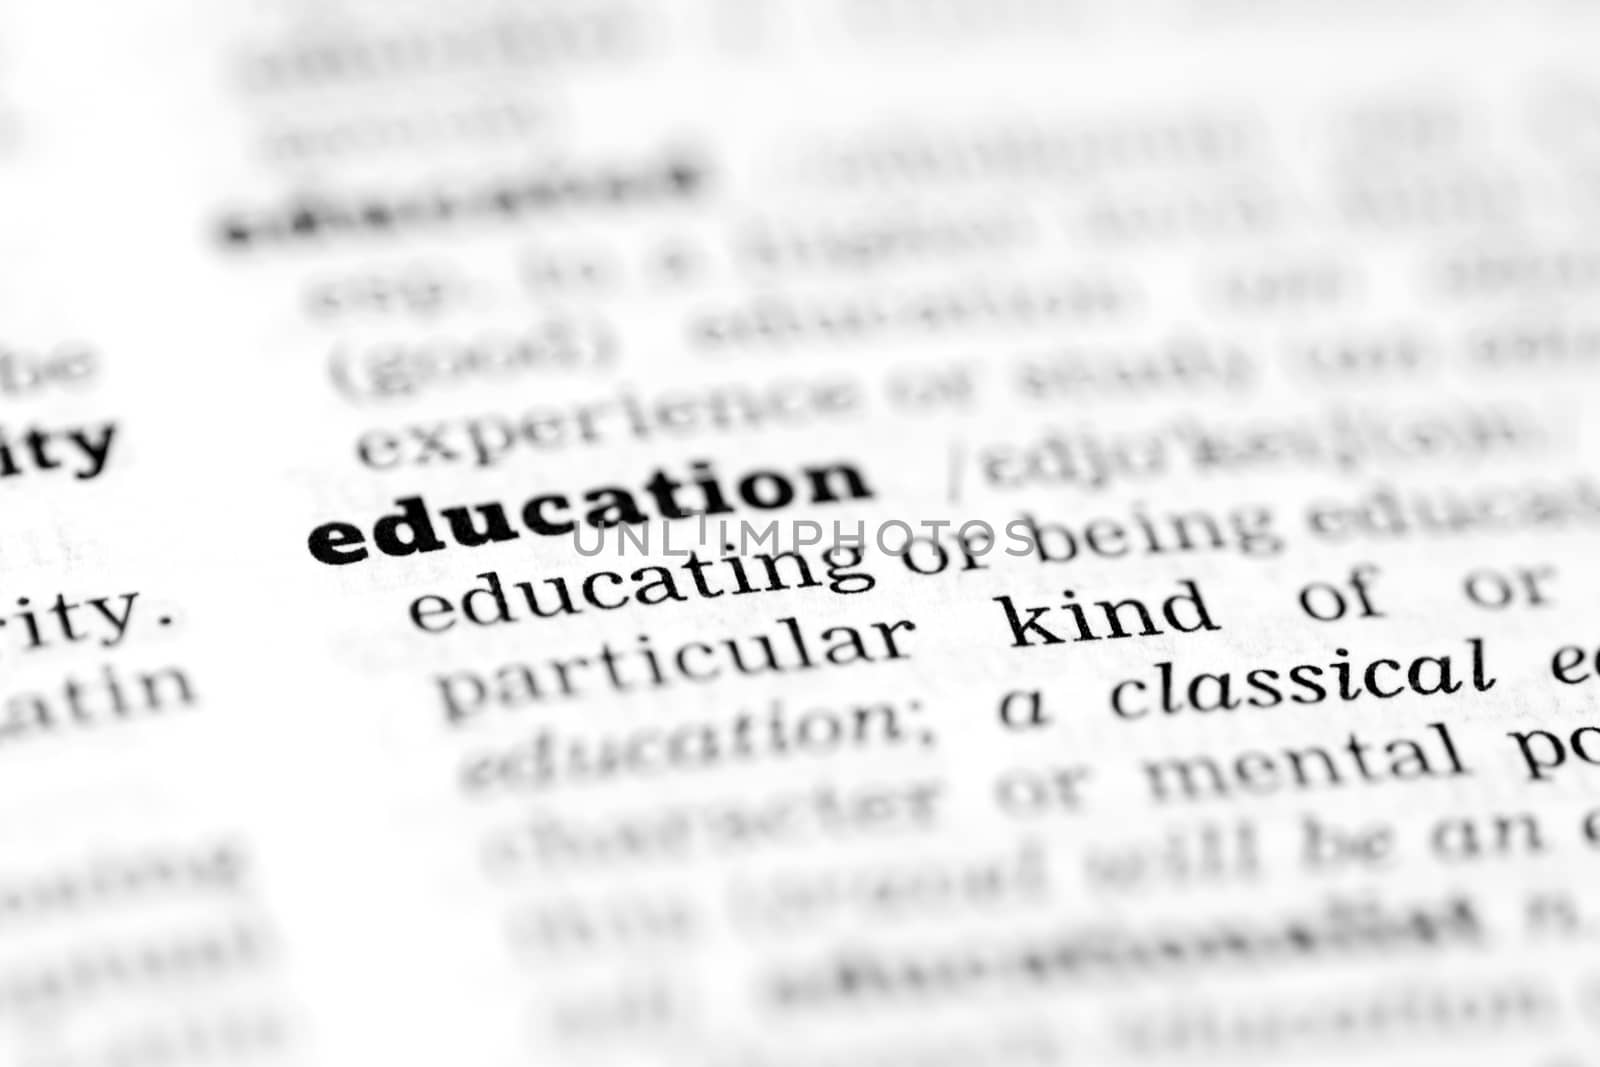 Education - dictionary definition